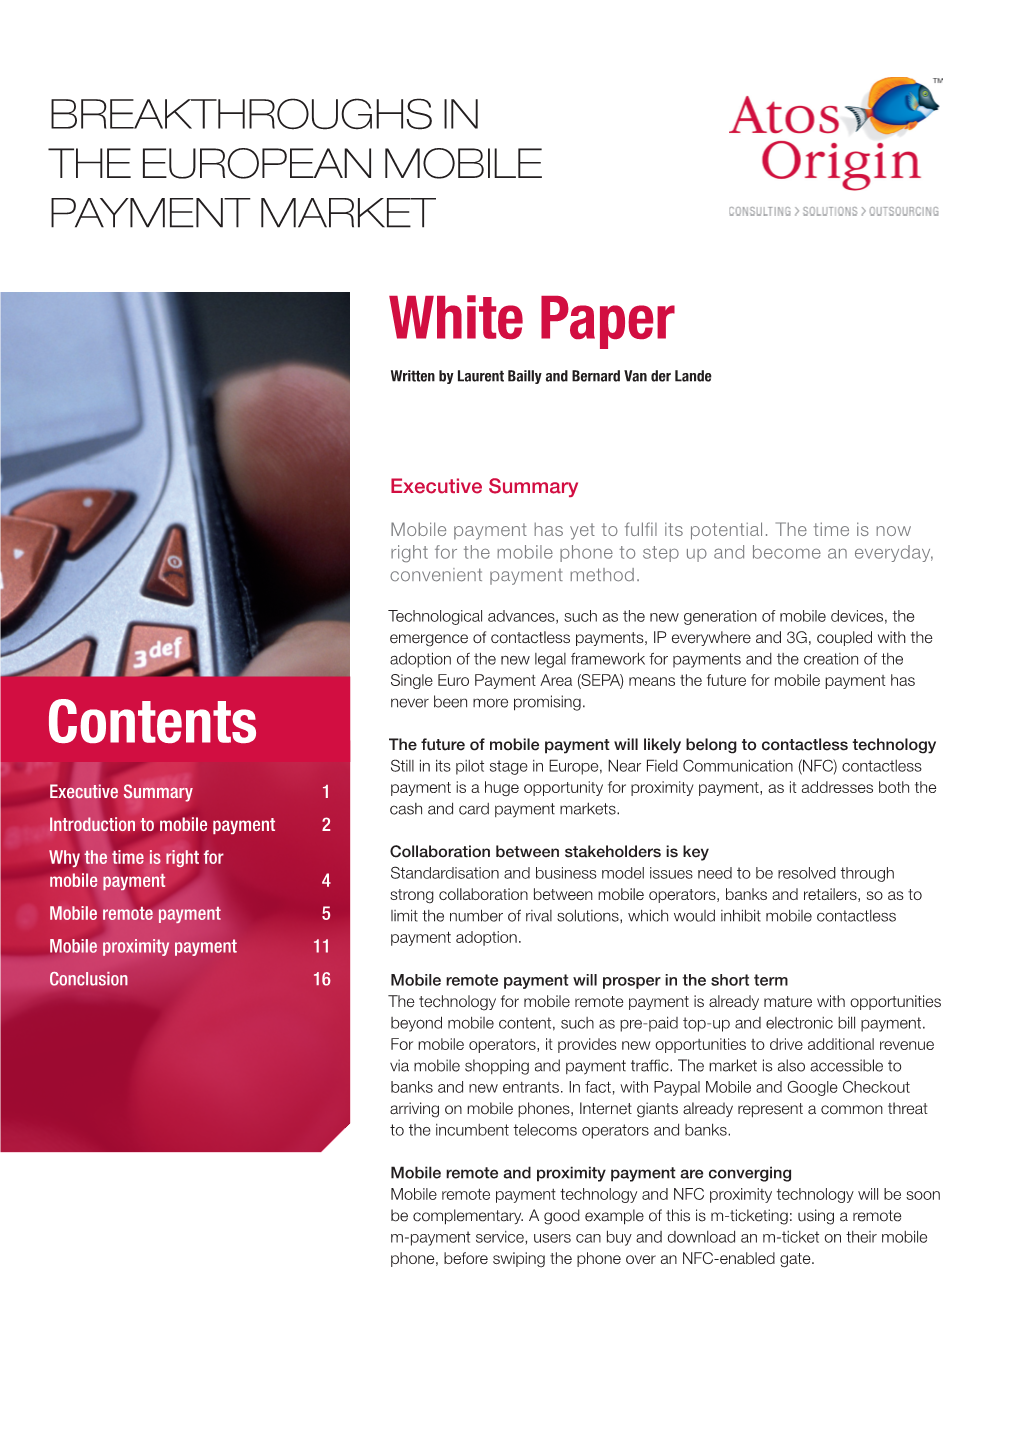 White Paper Contents